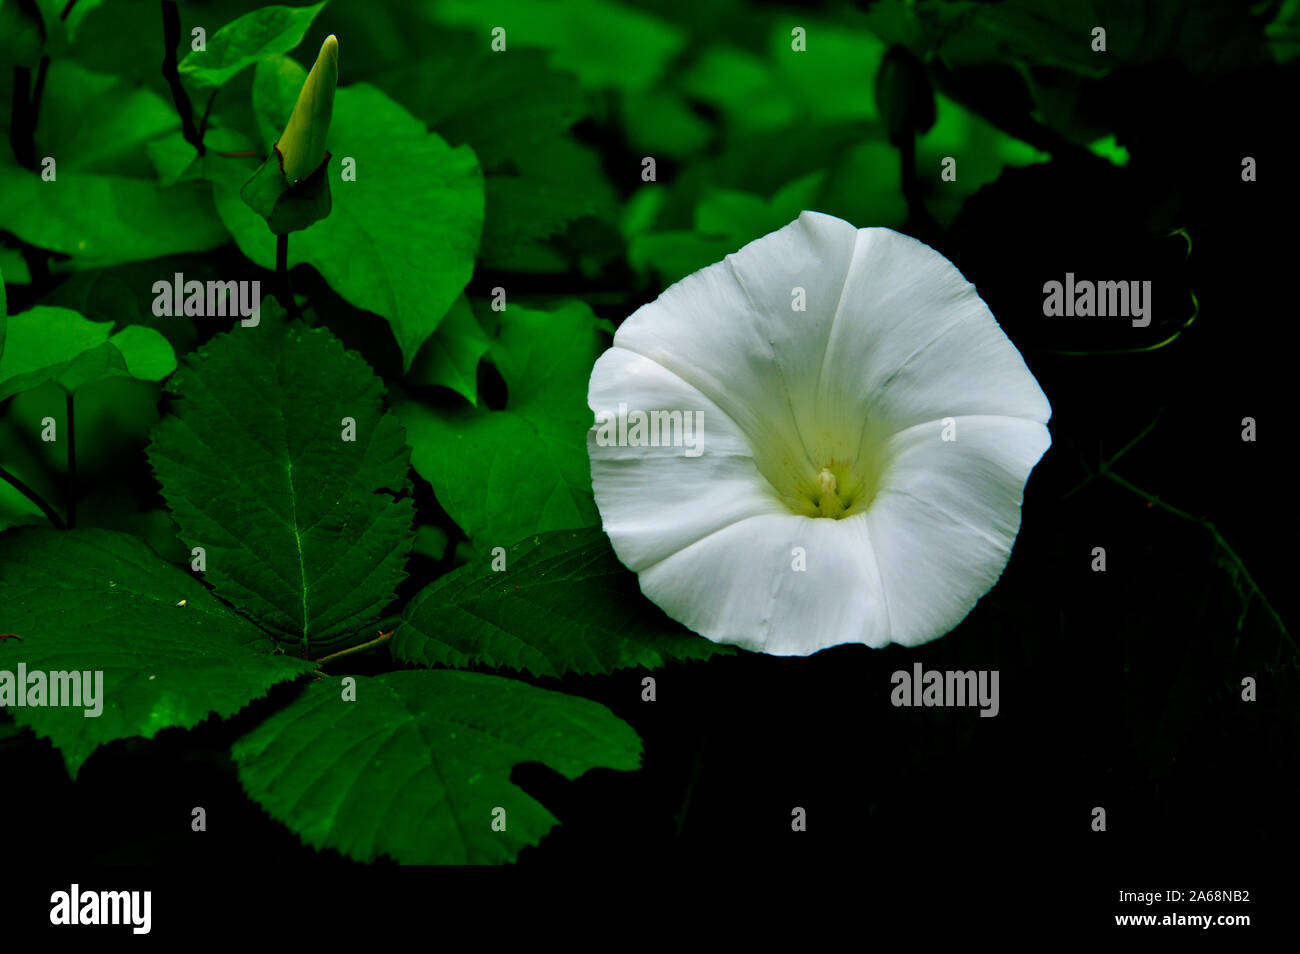 A wild Hedge Bindweed growing a beautiful white flower on a leafy green vine in British Columbia Canada. Stock Photo